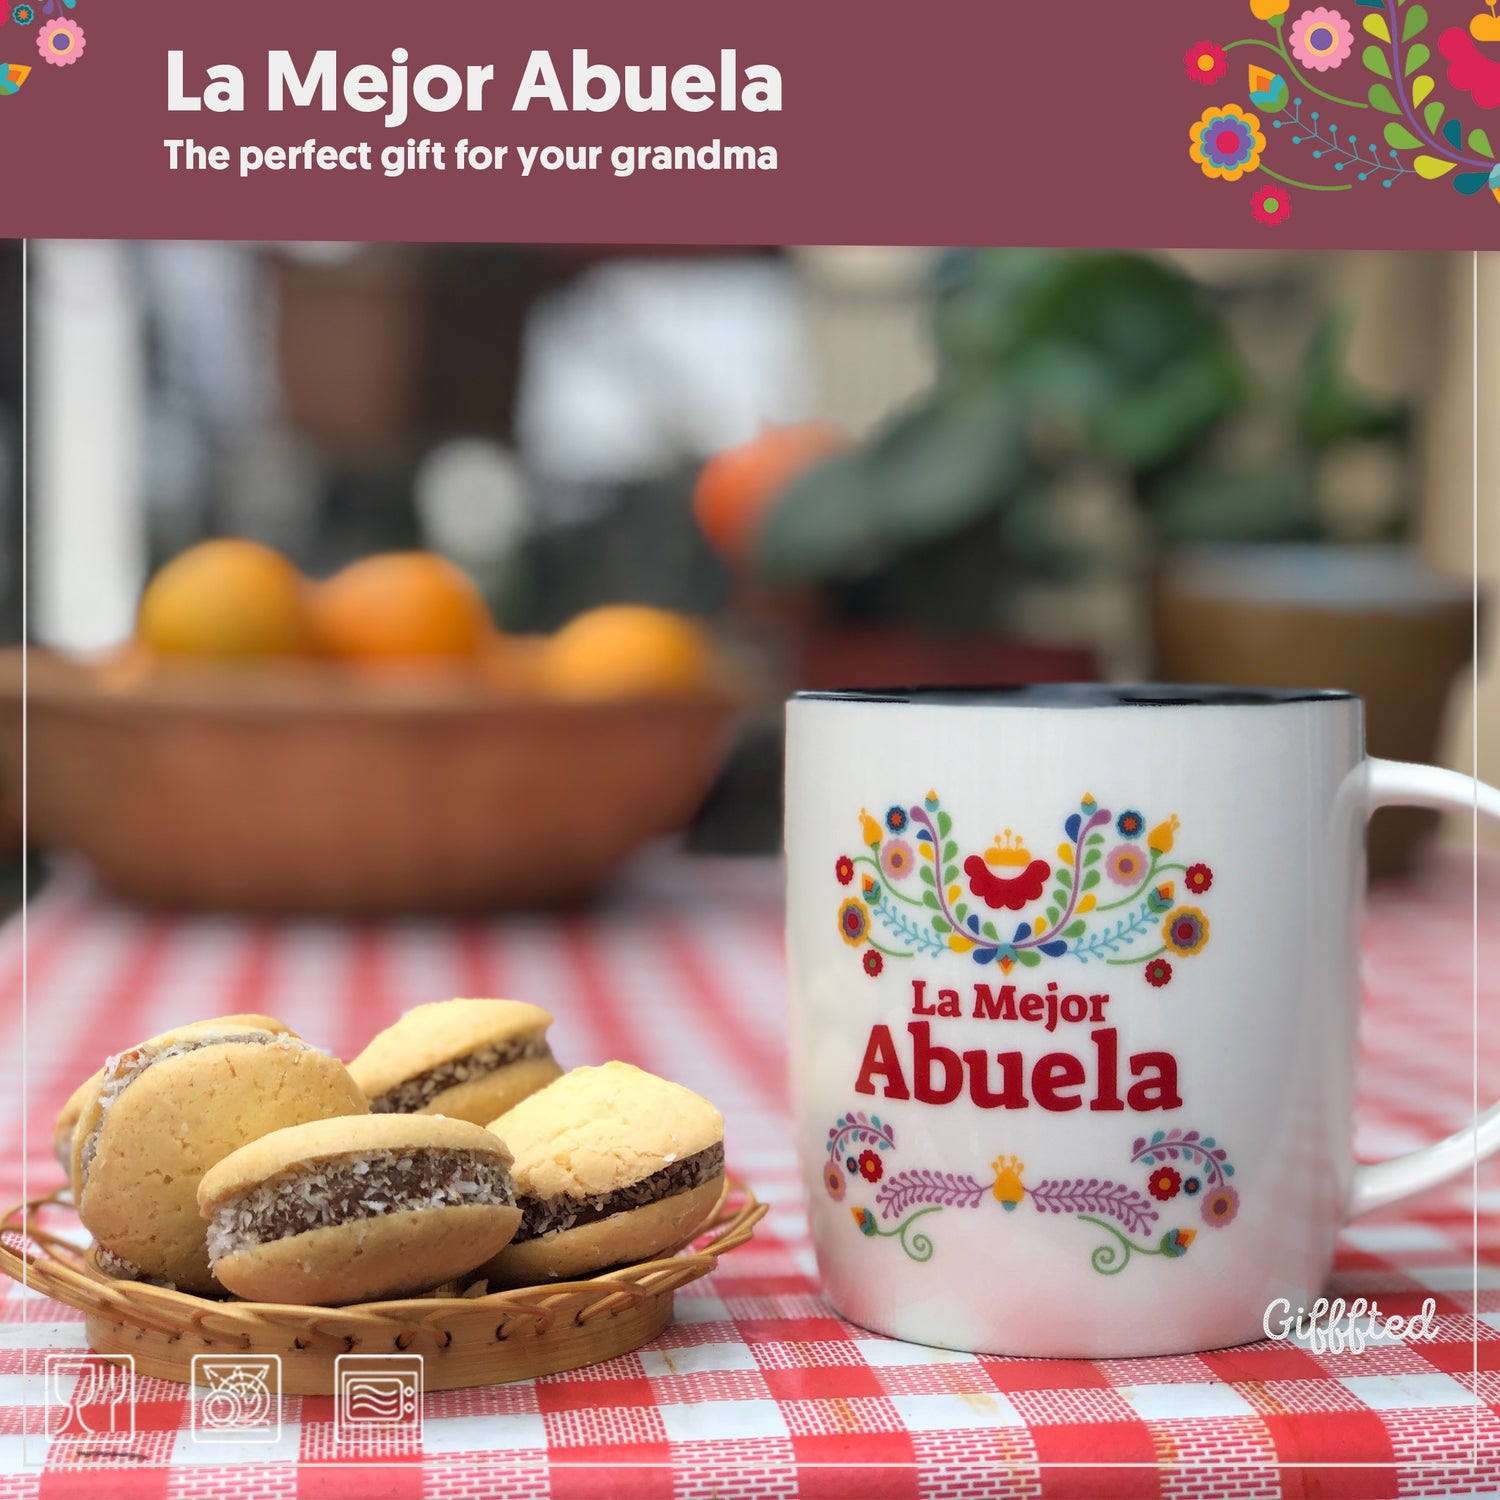 Triple Gifted Grandparents Gifts, La Mejor Abuela and Abuelo